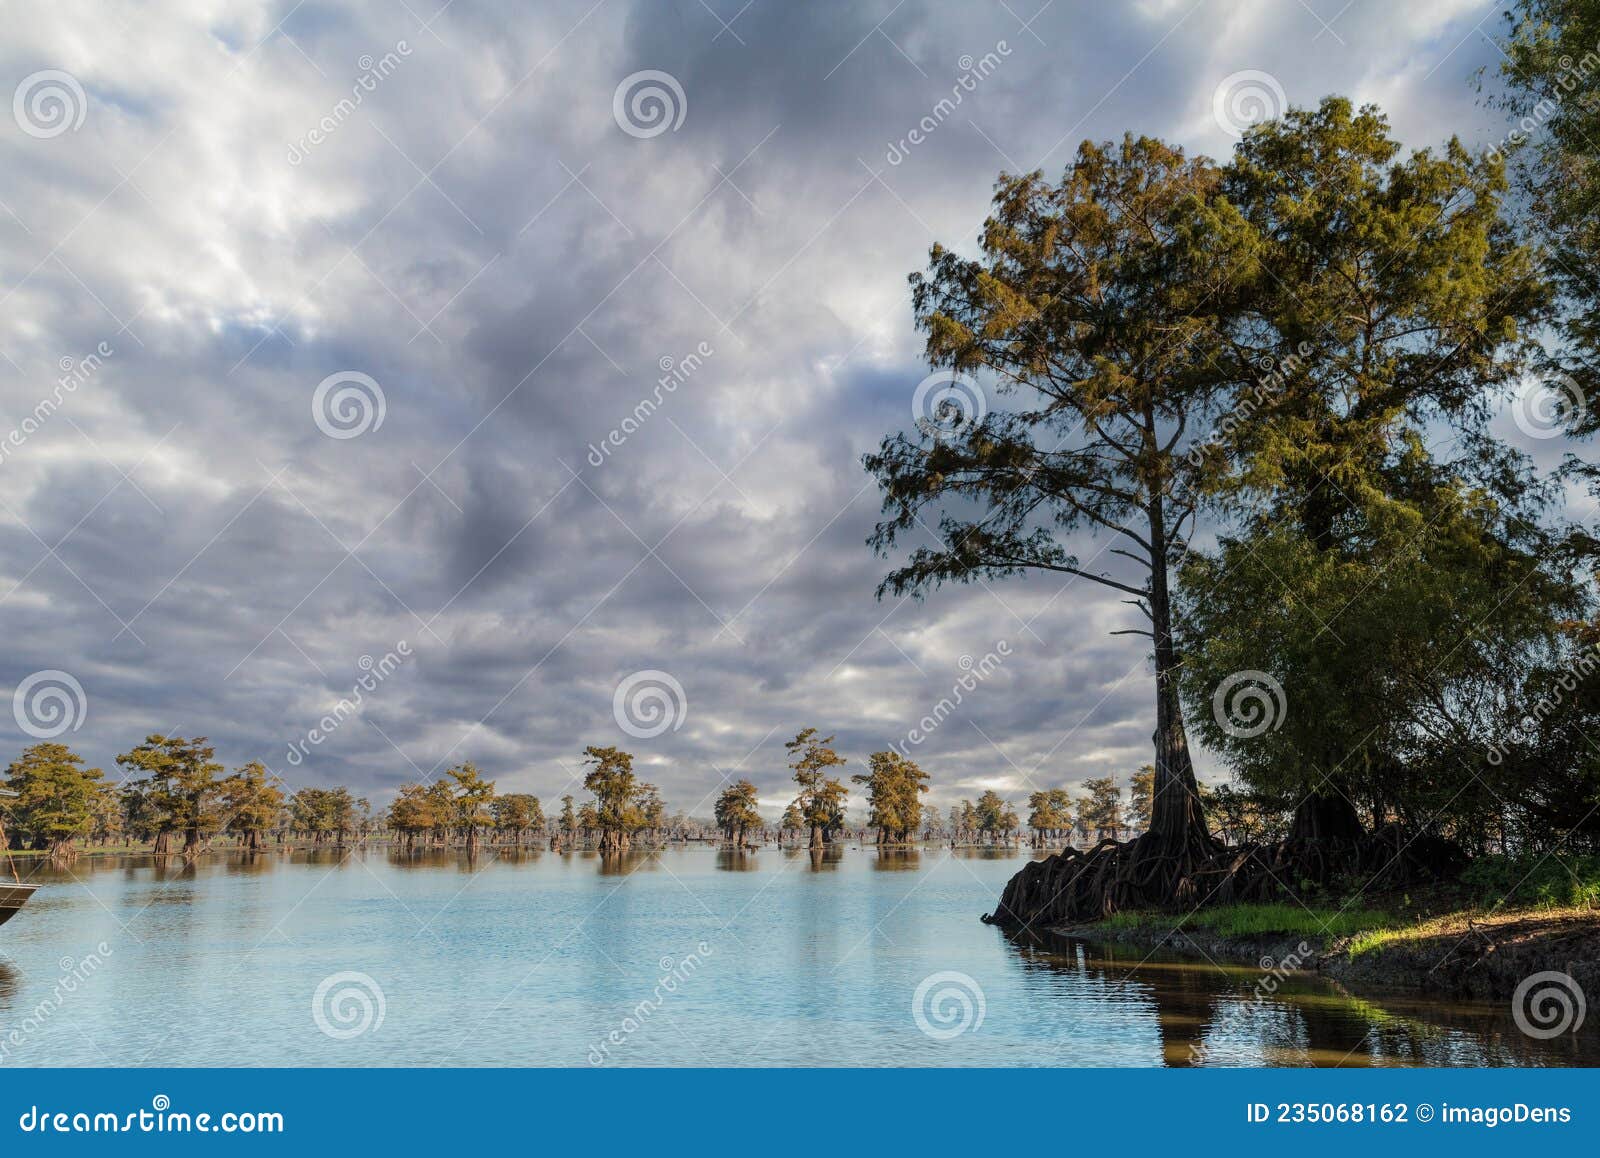 trees in the water of the bayous, louisiana